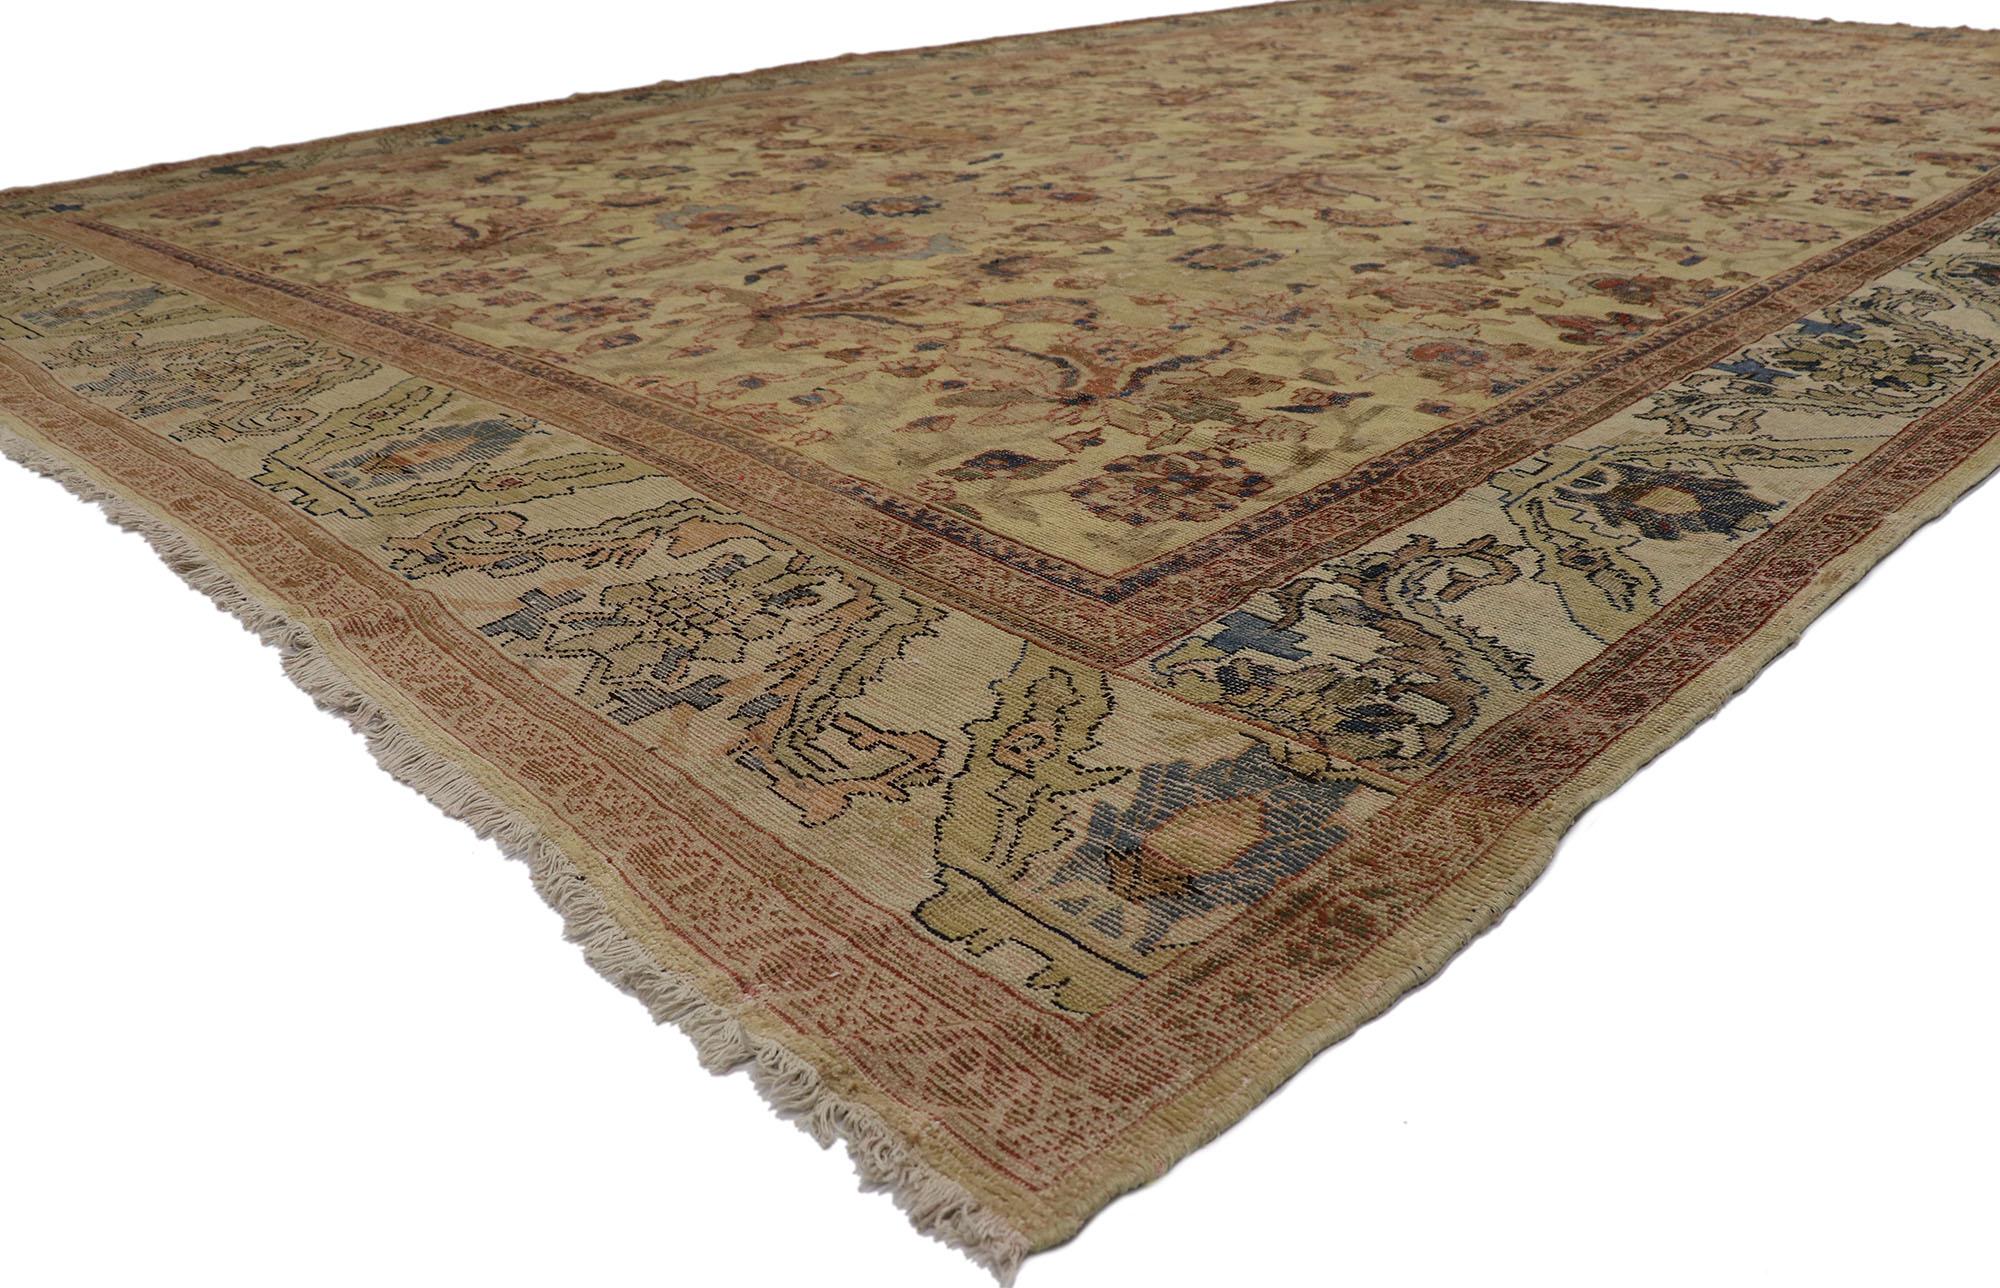 60941 Distressed Antique Persian Sultanabad Rug with Rustic Modern Style 12'01 x 20'01. Effortlessly chic and emanating coastal vibes with rustic sensibility, this hand knotted wool distressed antique Persian Sultanabad rug beautifully is a